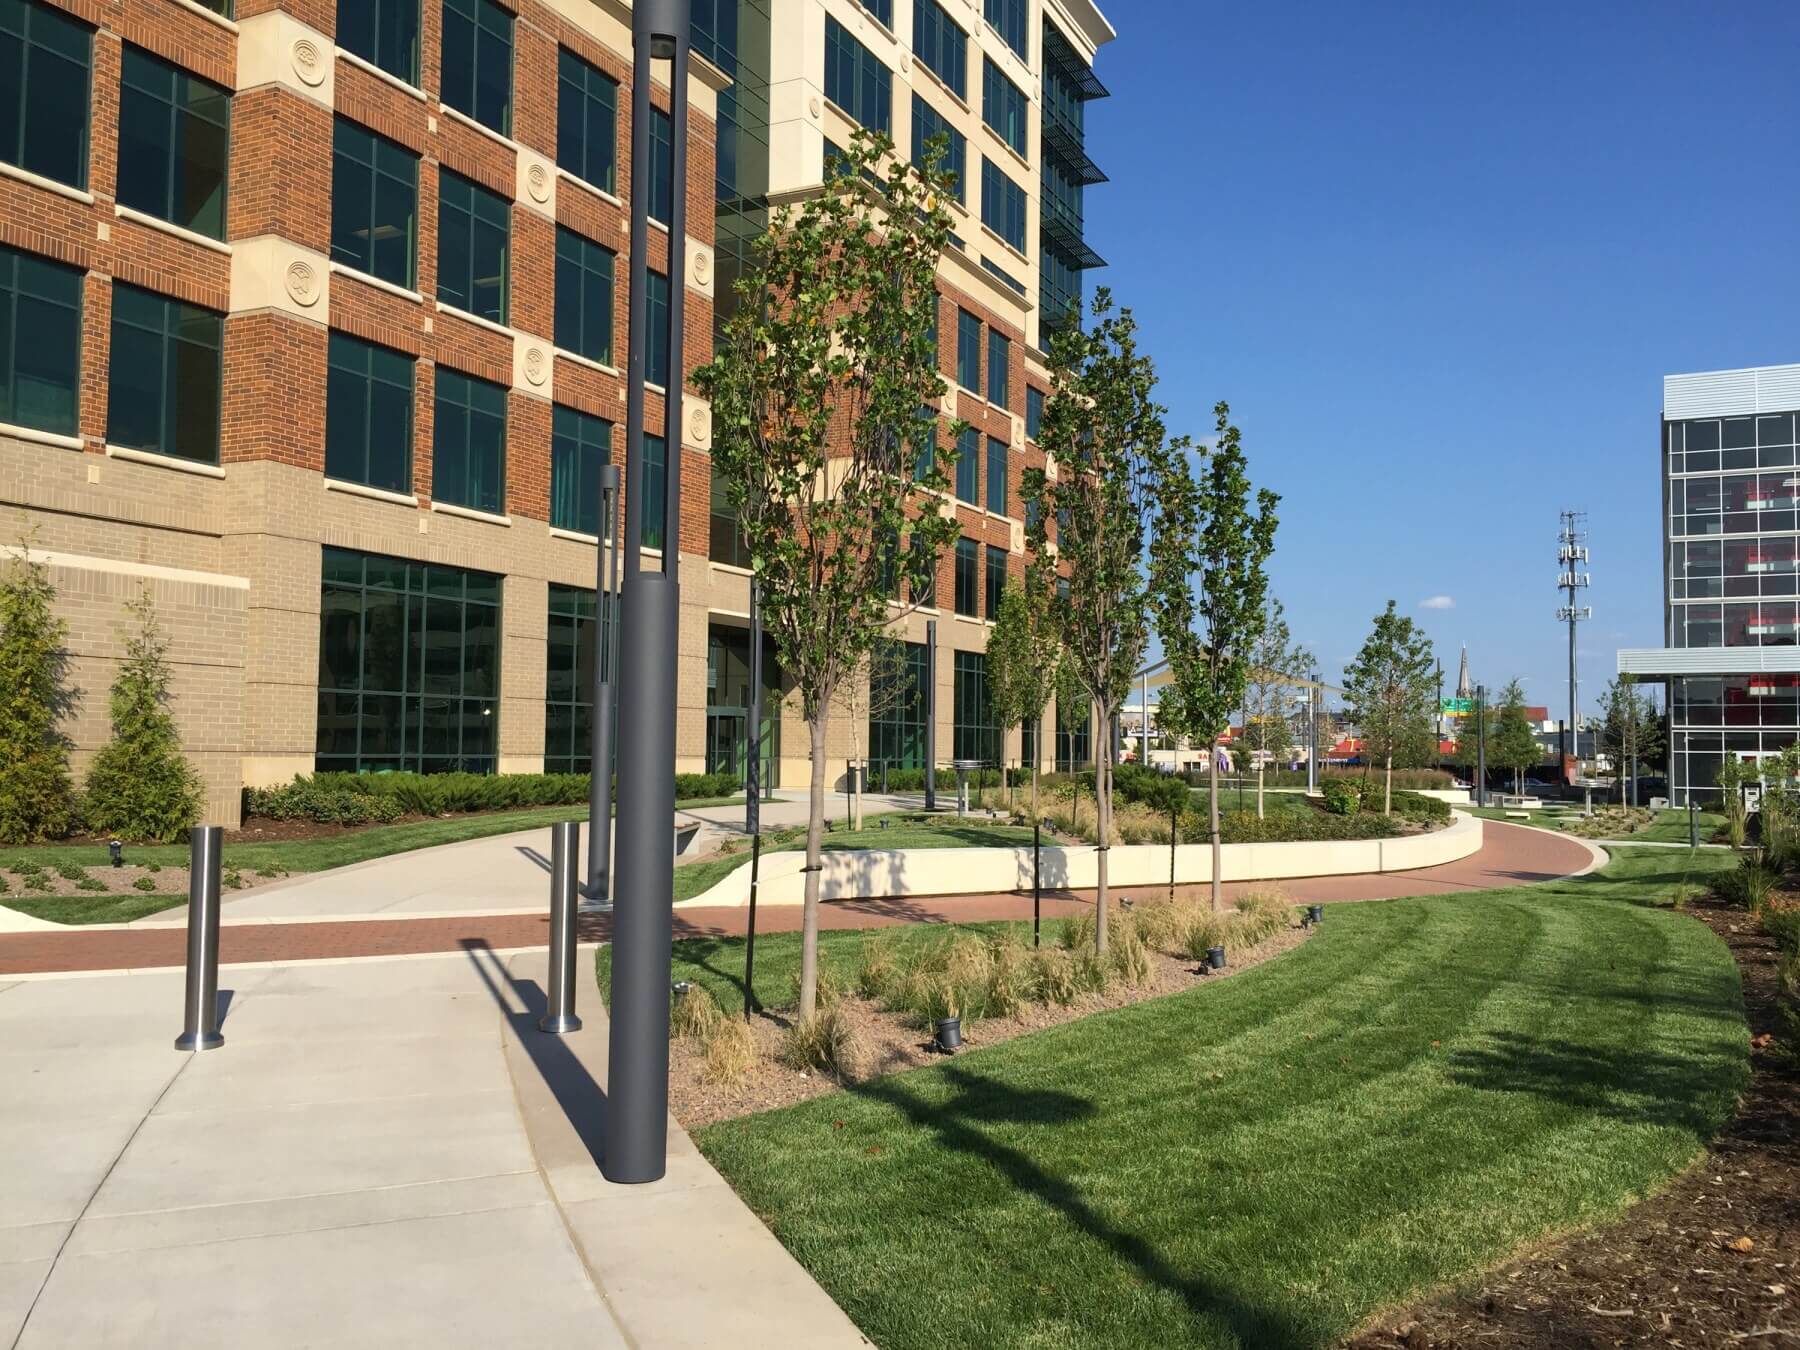 a shot of grass and metal poles outside of the University of Louisville’s J.D. Nichols Campus Plaza